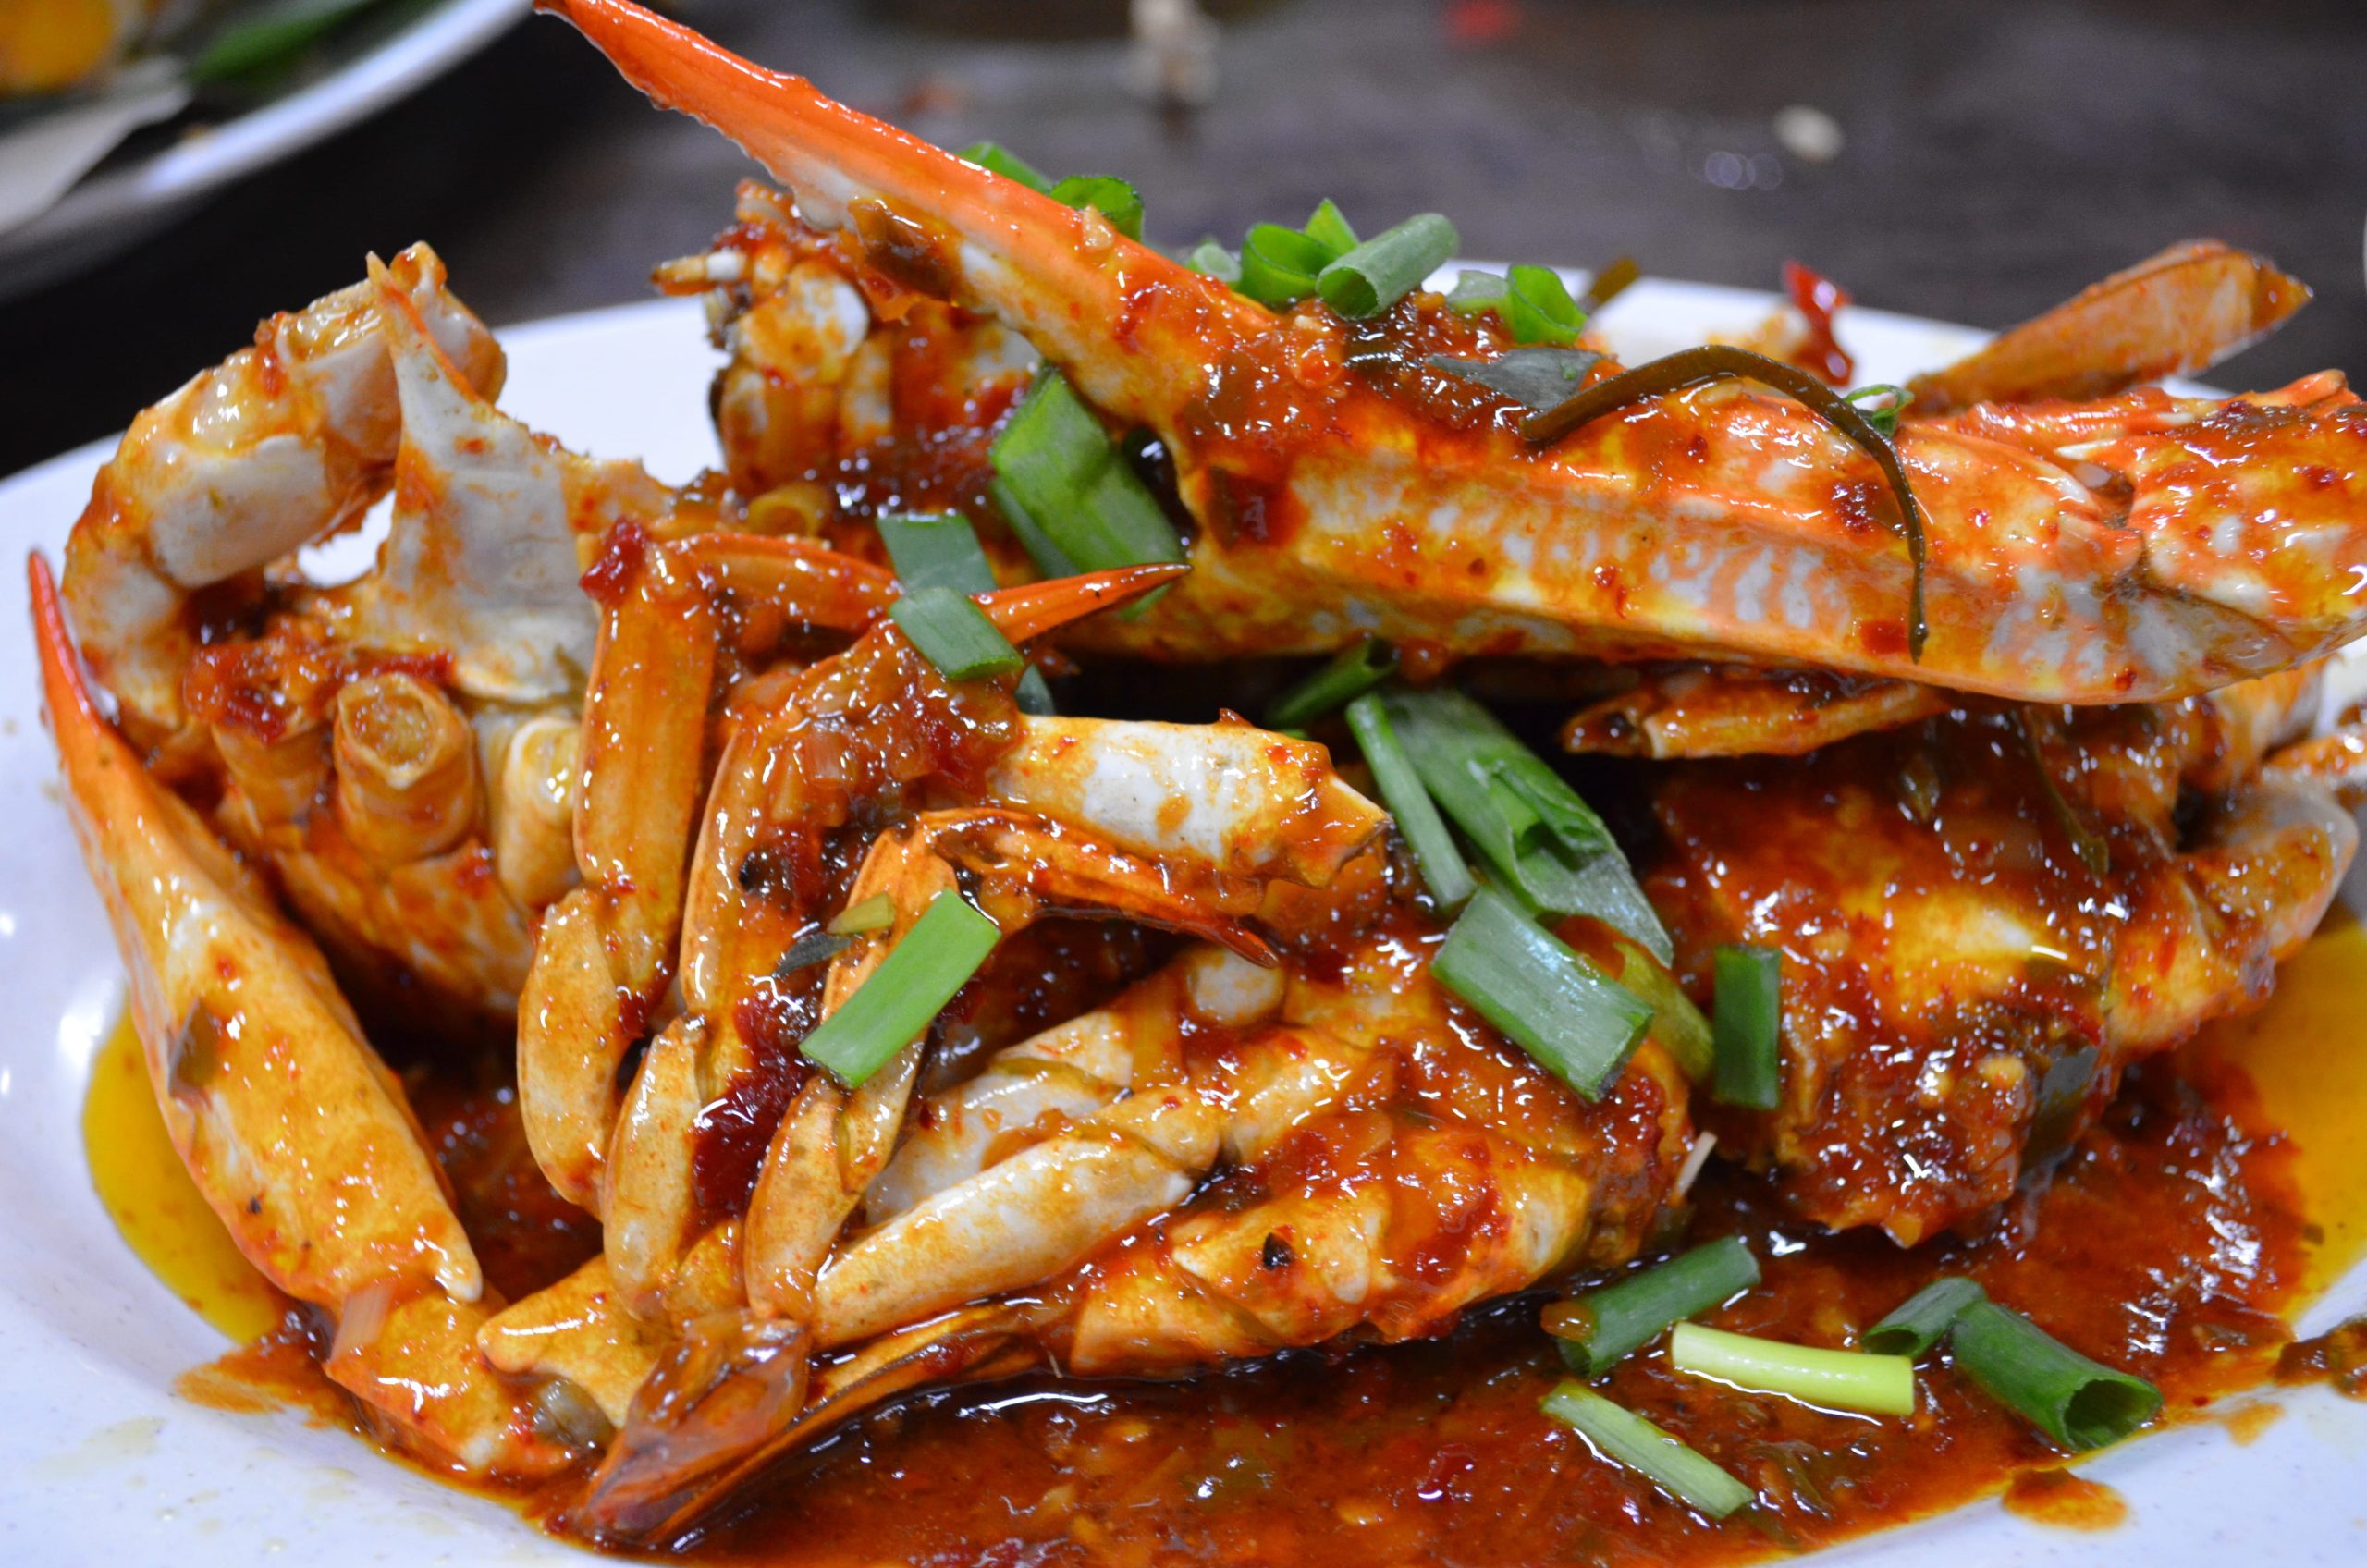 Recommended Foods to Try in Singapore